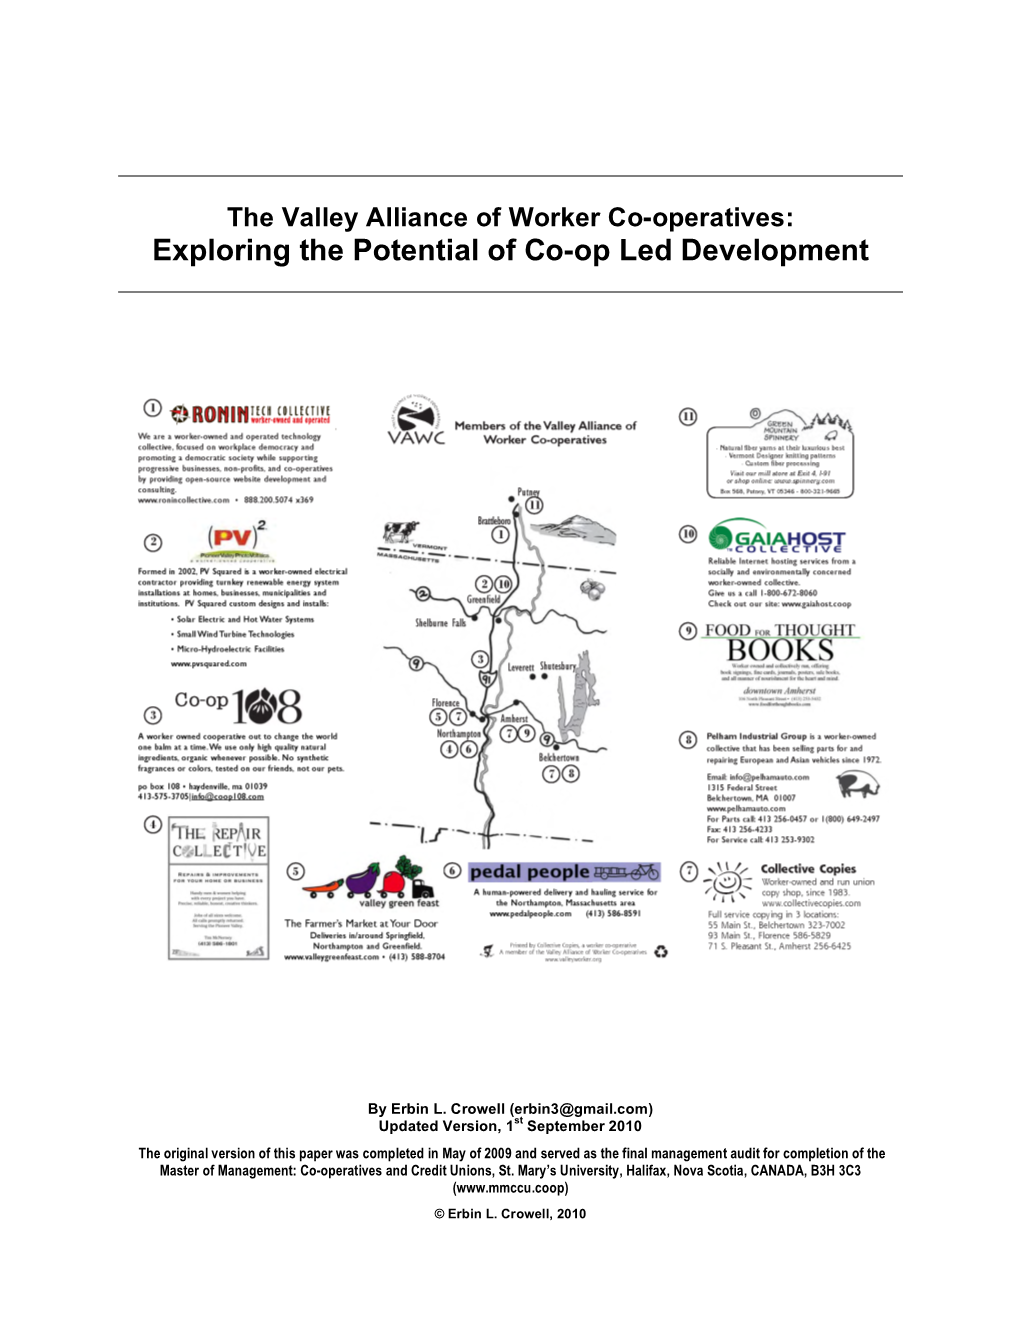 103 2010 Crowell the Valley Alliance of Worker Cooperatives